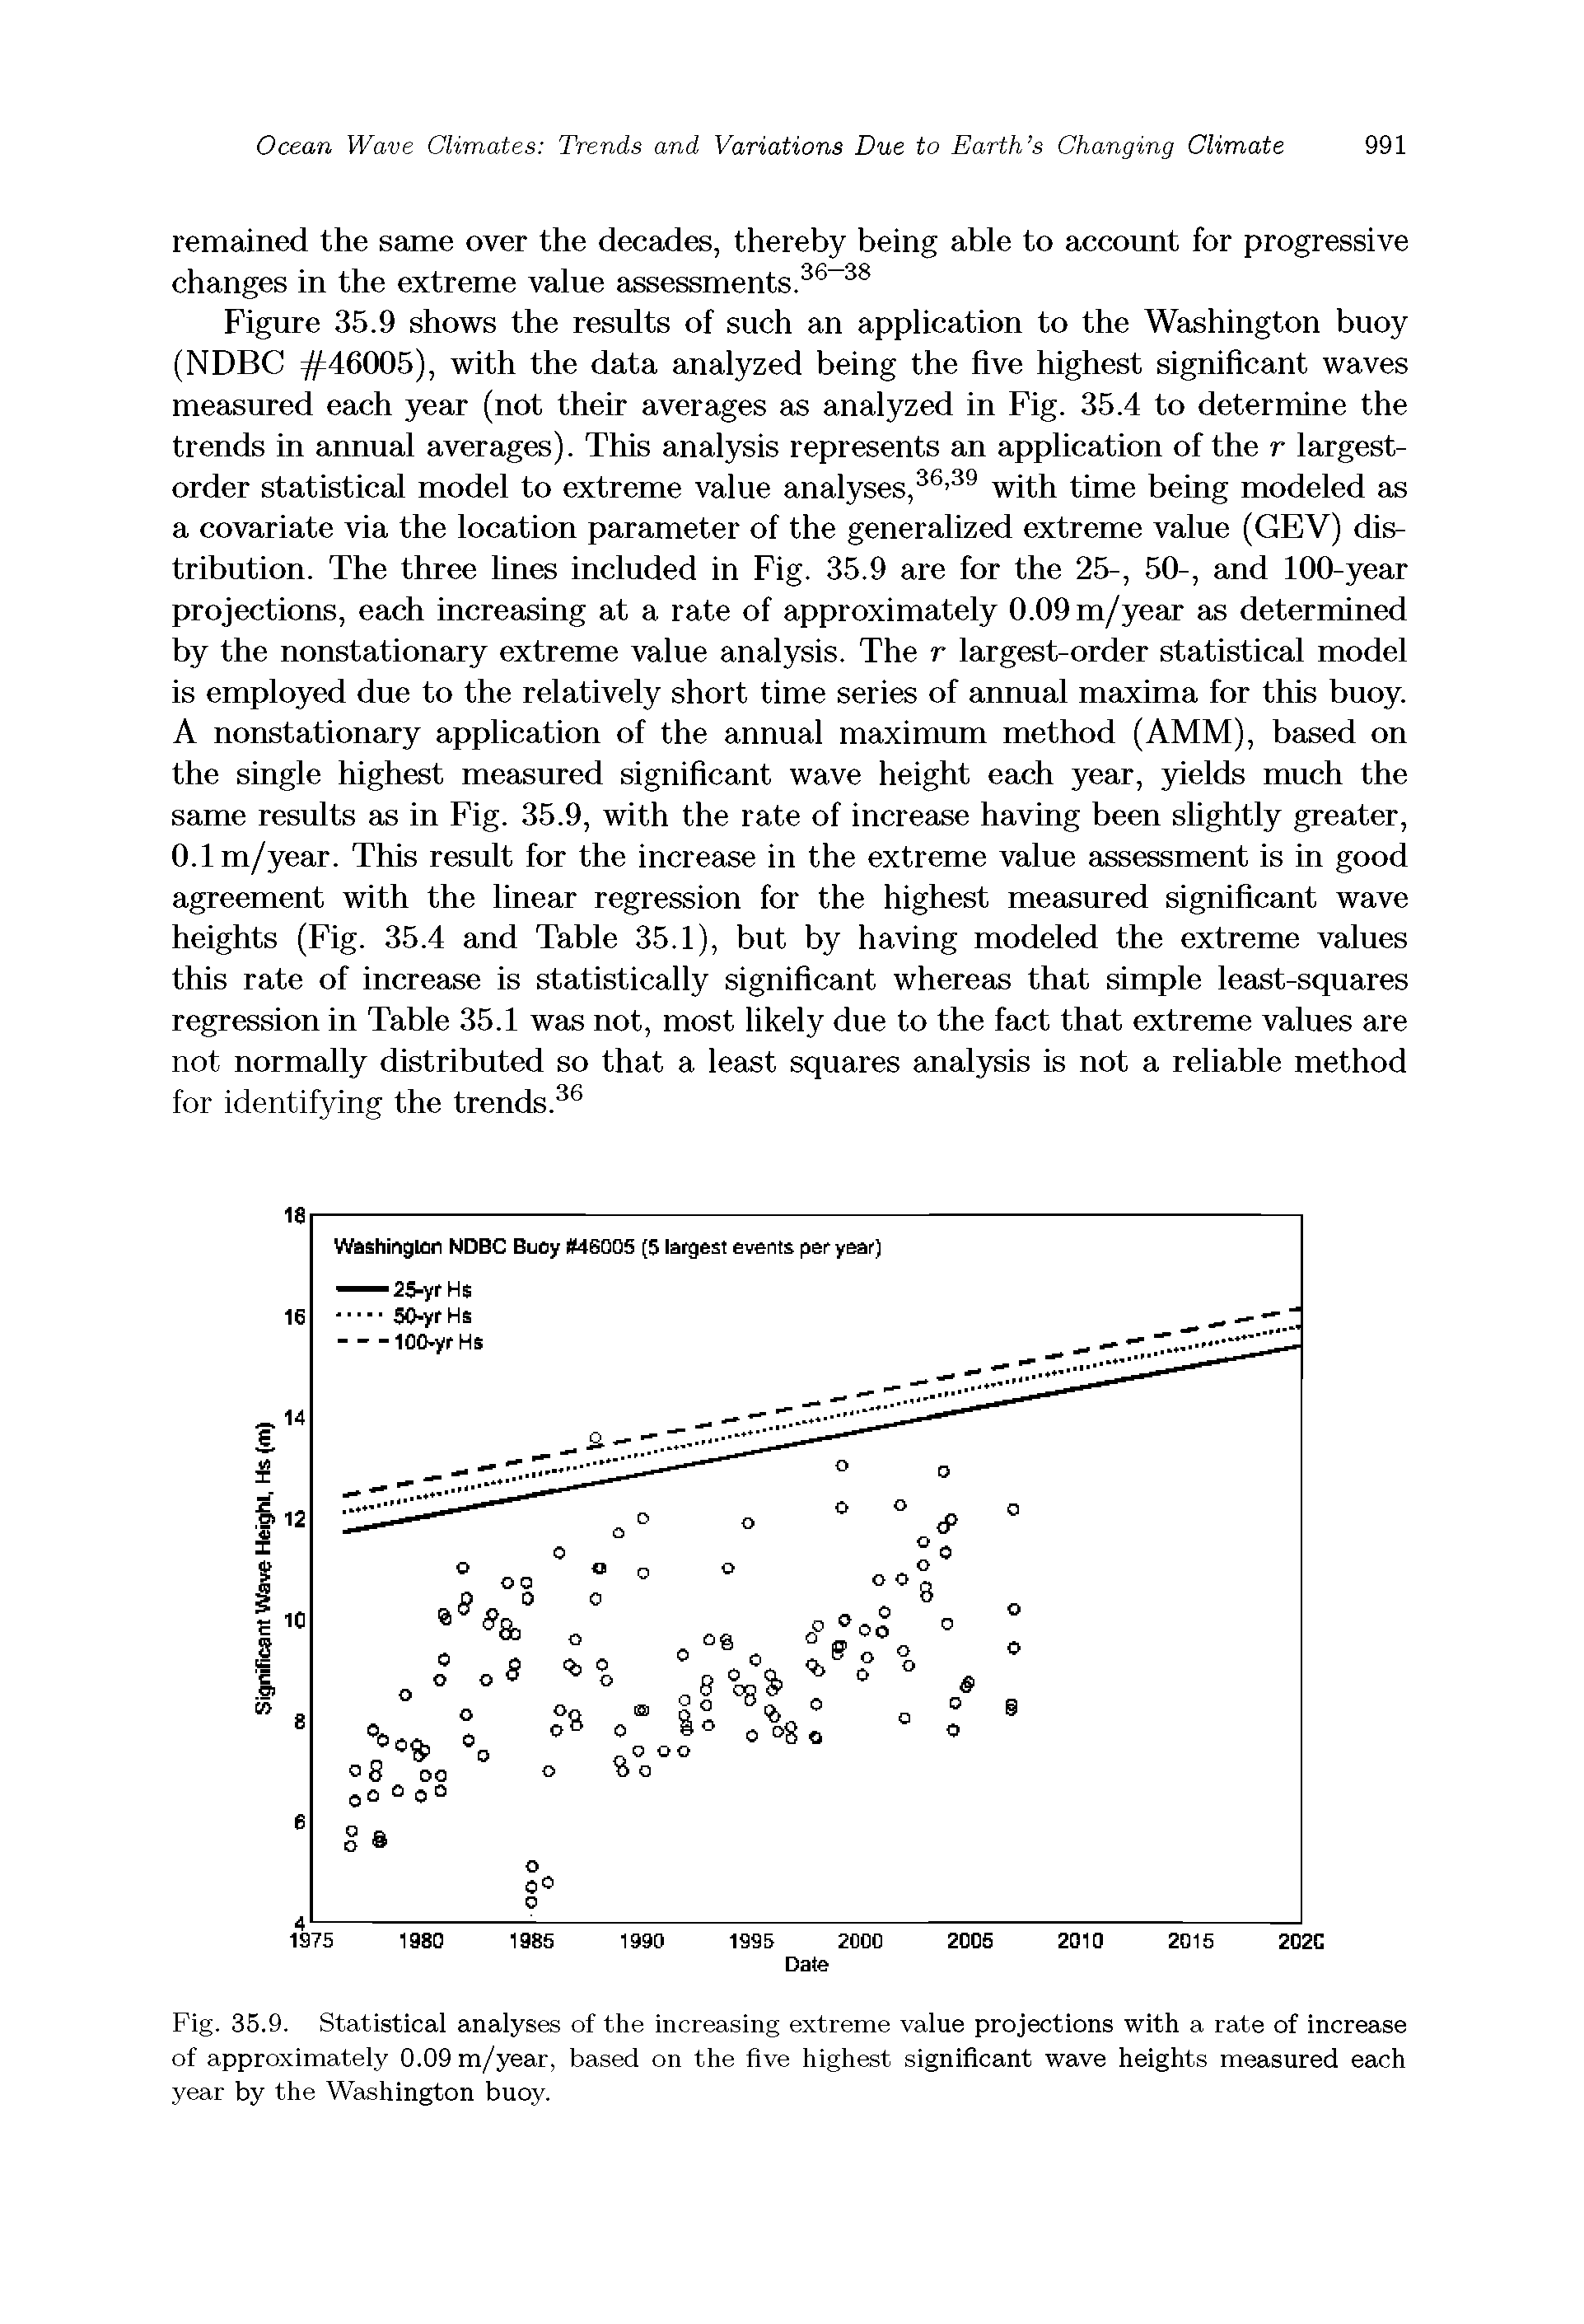 Fig. 35.9. Statistical analyses of the increasing extreme value projections with a rate of increase of approximately 0.09 m/year, based on the five highest significant wave heights measured each year by the Washington buoy.